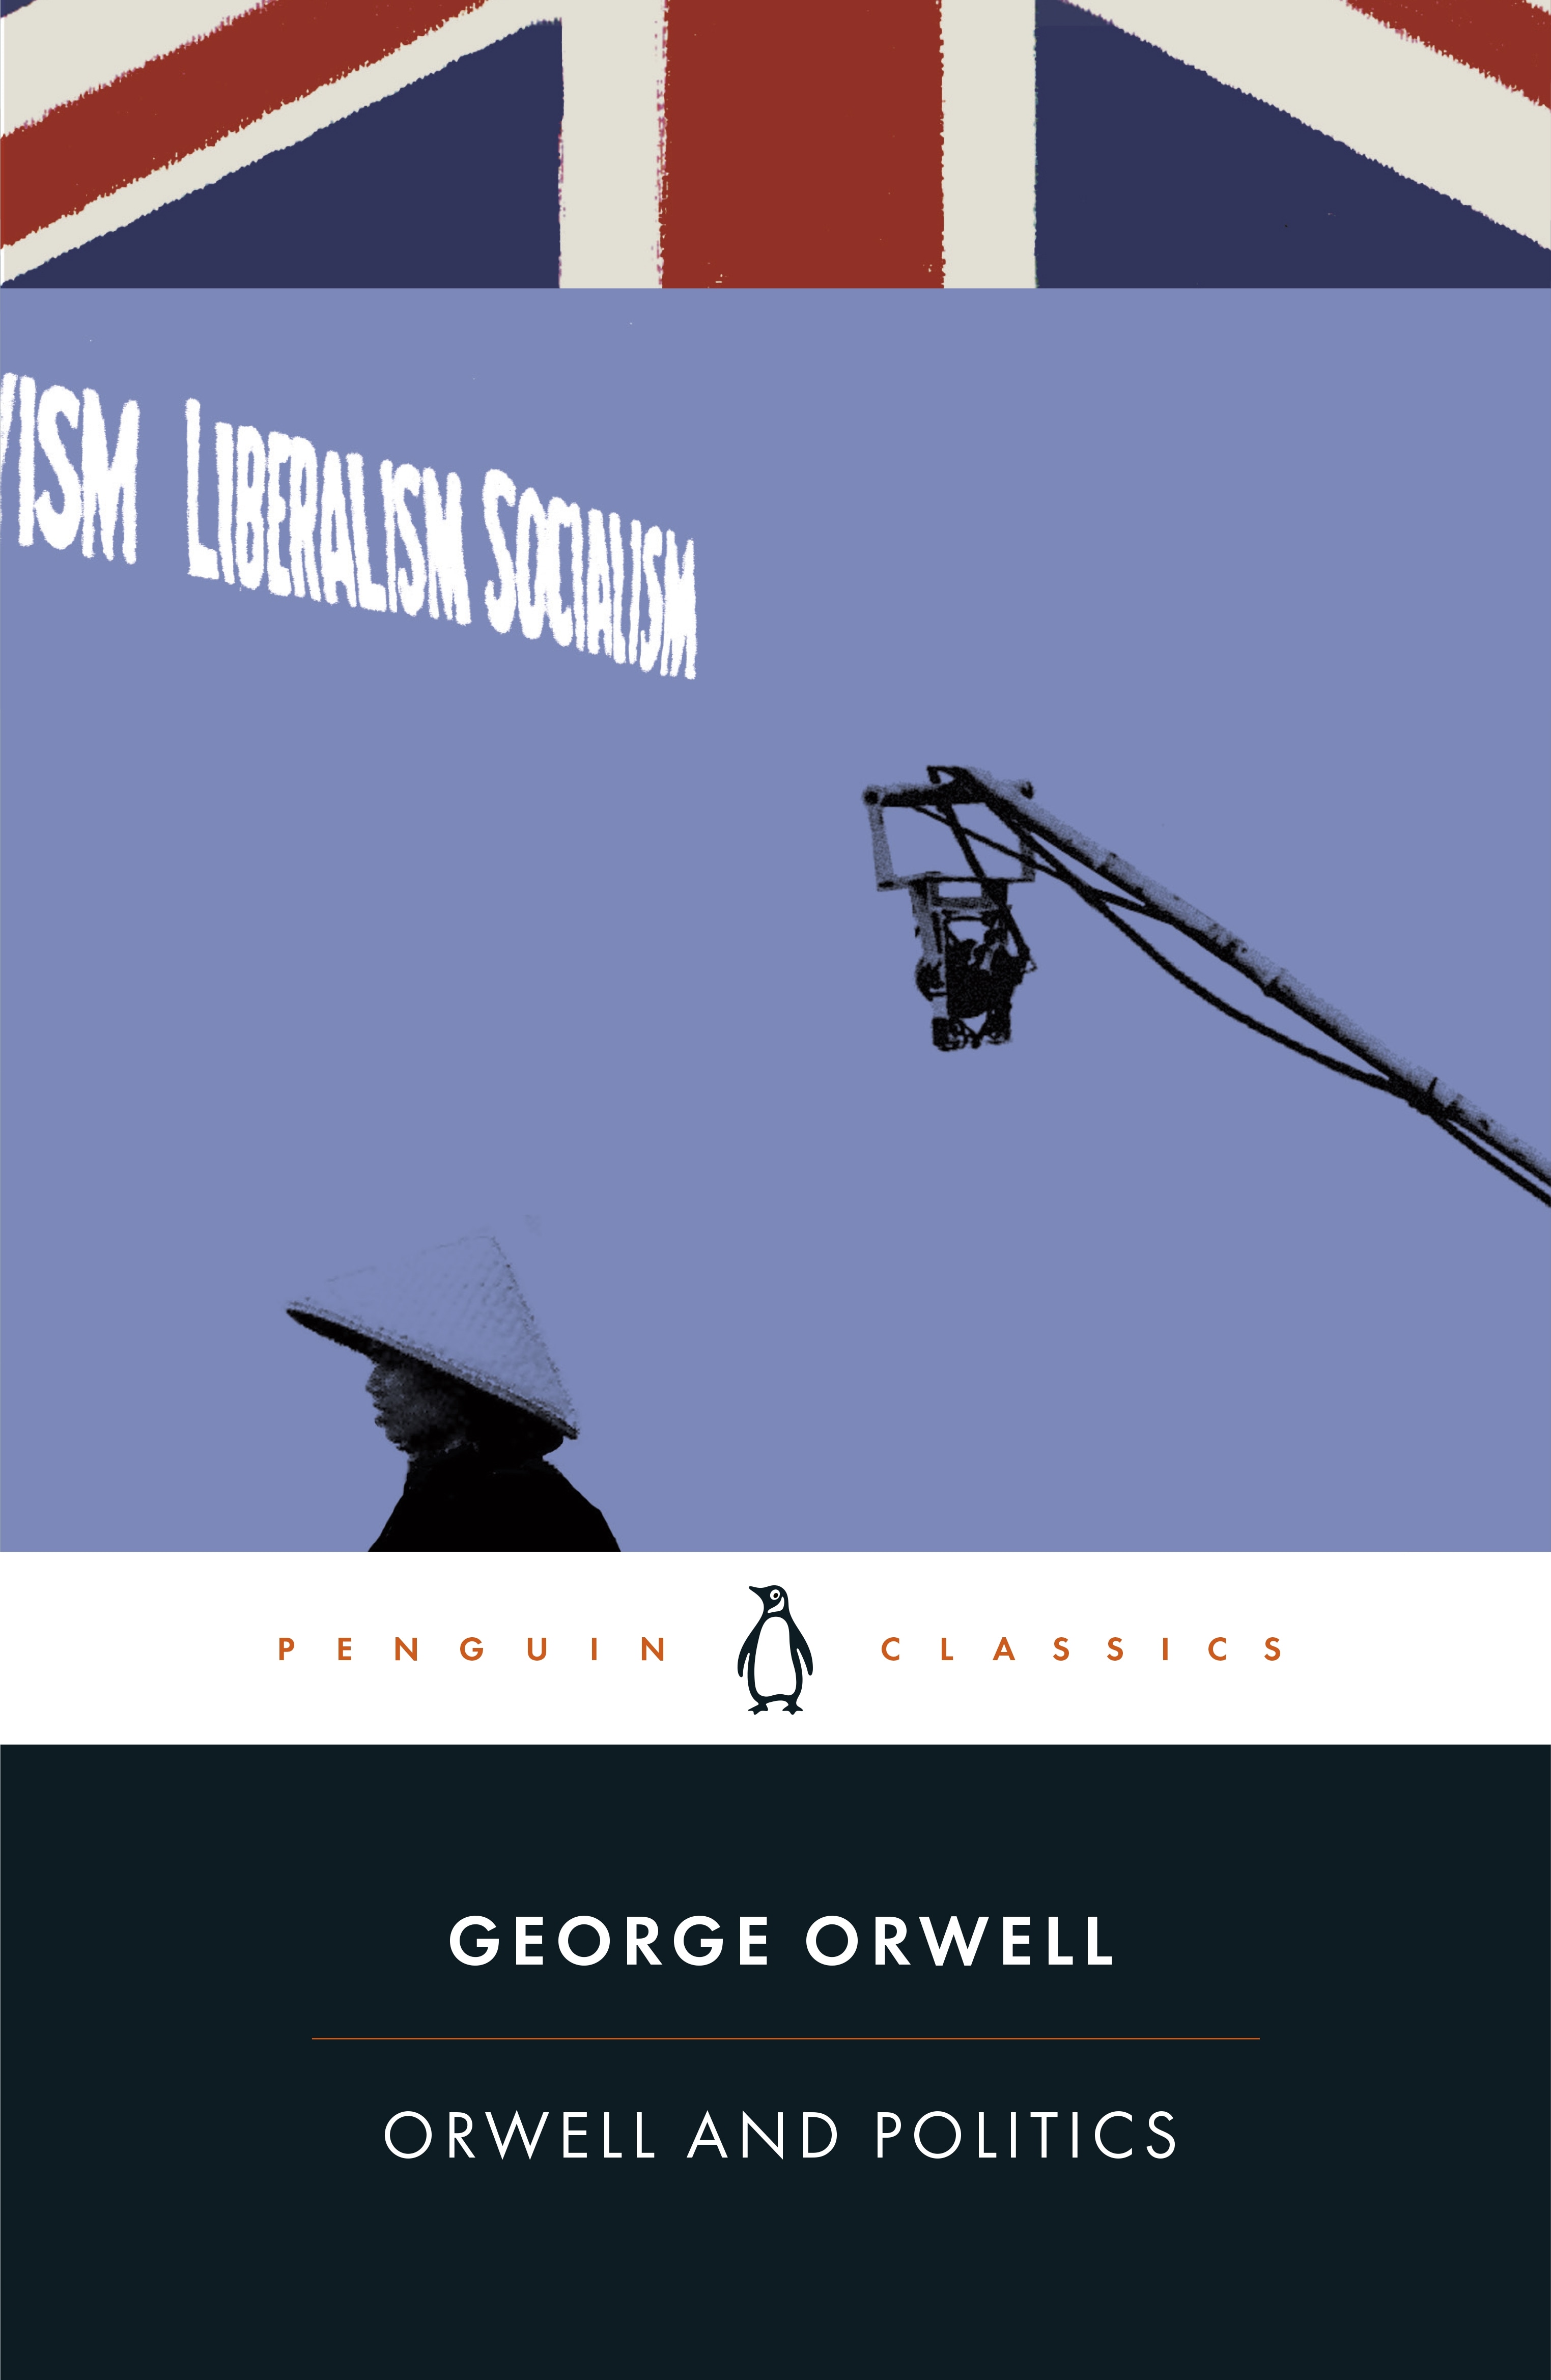 Book “Orwell and Politics” by George Orwell, Peter Davison — October 1, 2020